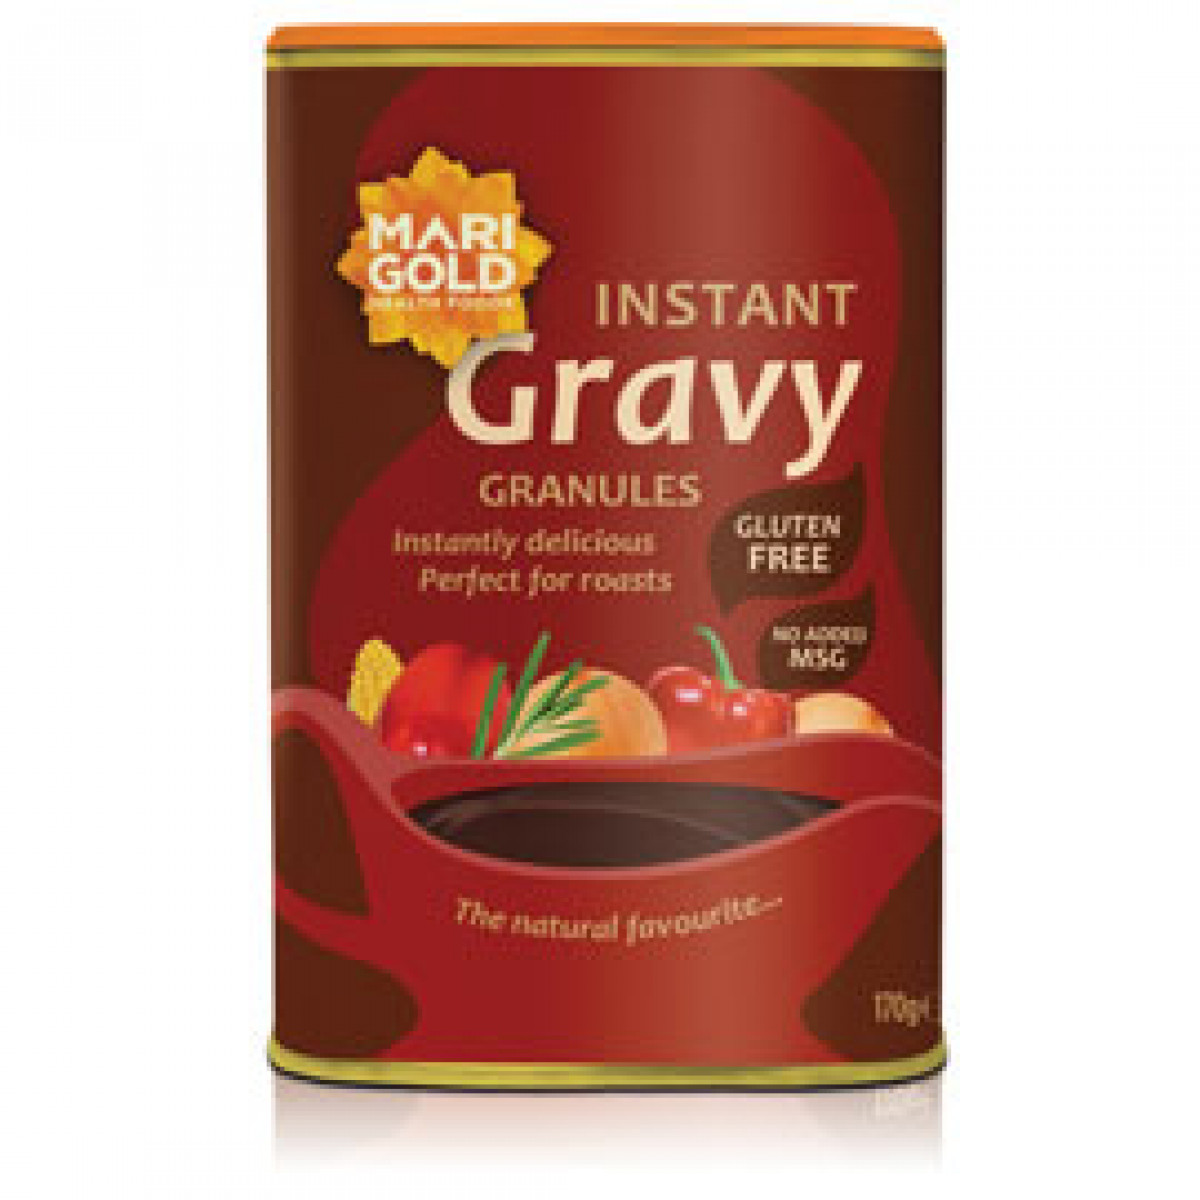 Product picture for Instant Vegetarian Gravy Granules